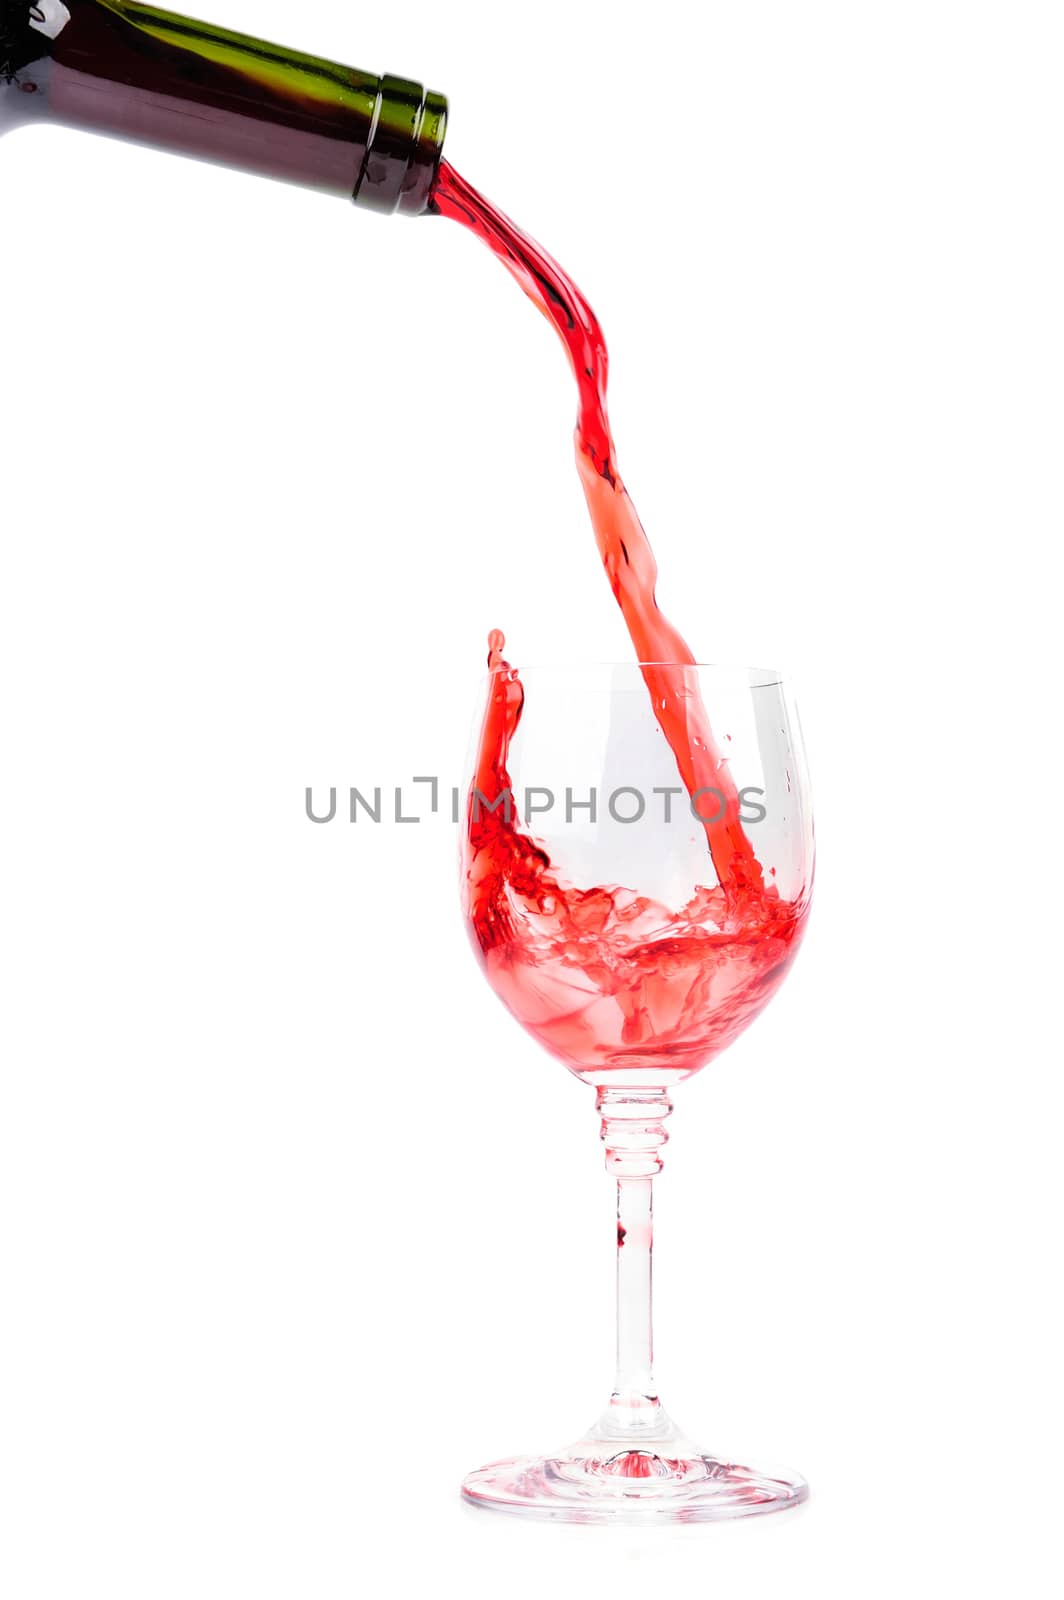 Red wine pouring into wine glass by byrdyak